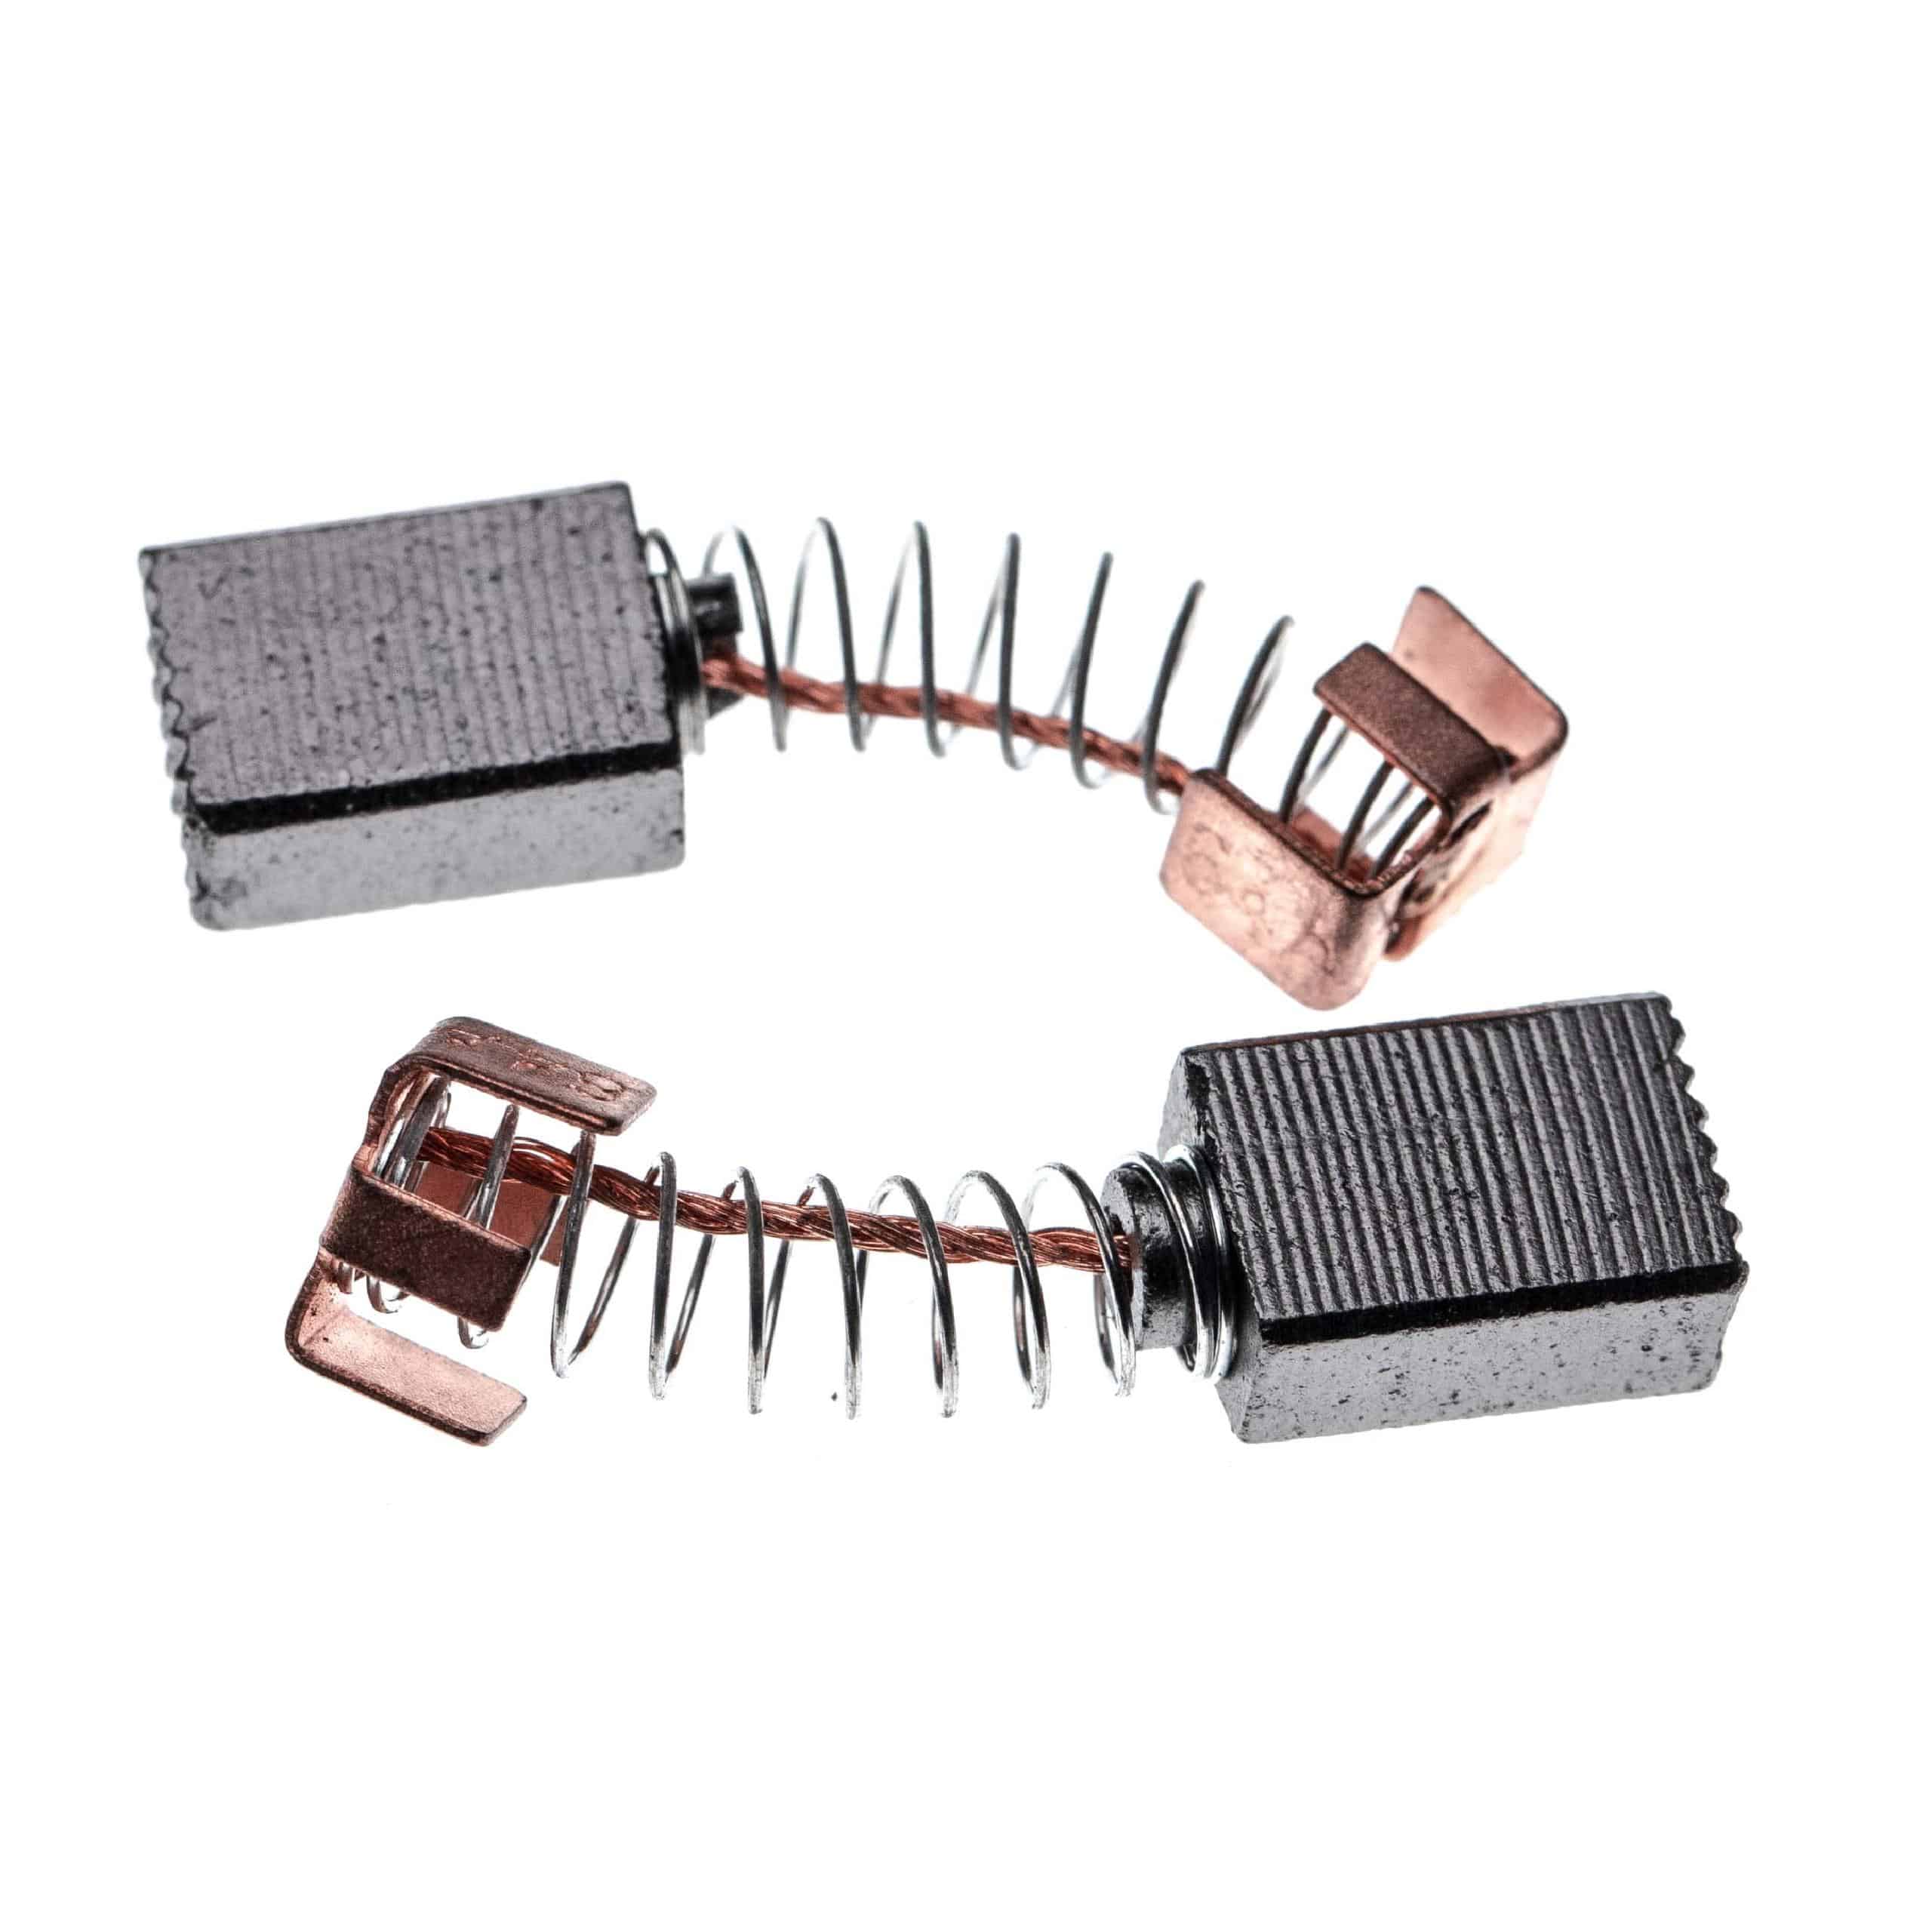 2x Carbon Brush as Replacement for Makita 191627-8, CB-57 Electric Power Tools + Spring, 5 x 8 x 11mm